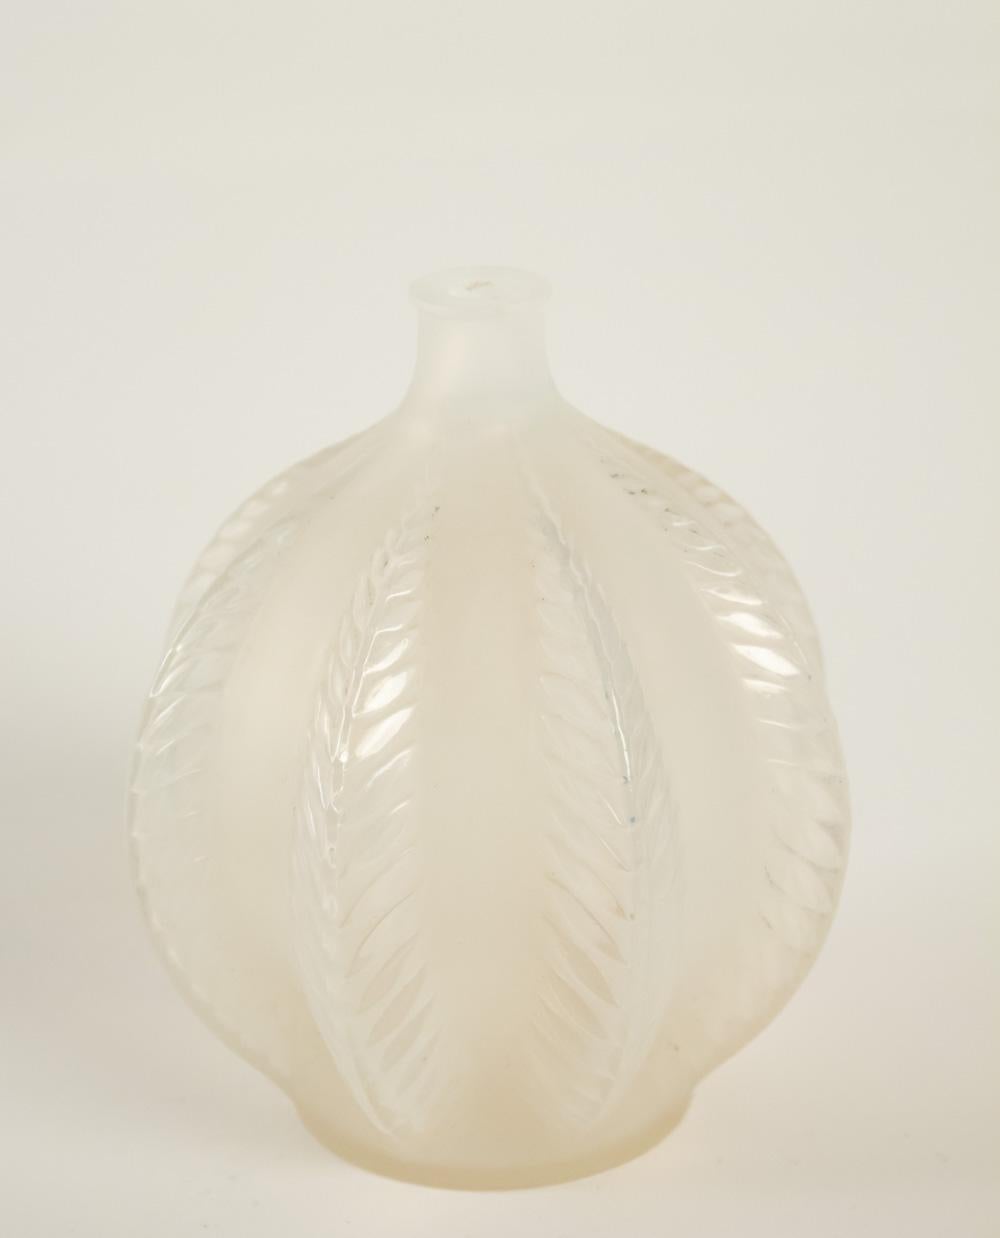 Rene Lalique vase Malines: 12 cm tall apparently opalescent glass mold blown with vertical leaf motif
Signed. Model: 957, circa 1924. Model created in 1924.
Measures: H 12 cm
Bibliographie:
Félix Marcilhac, “René Lalique, 1860-1945, maître